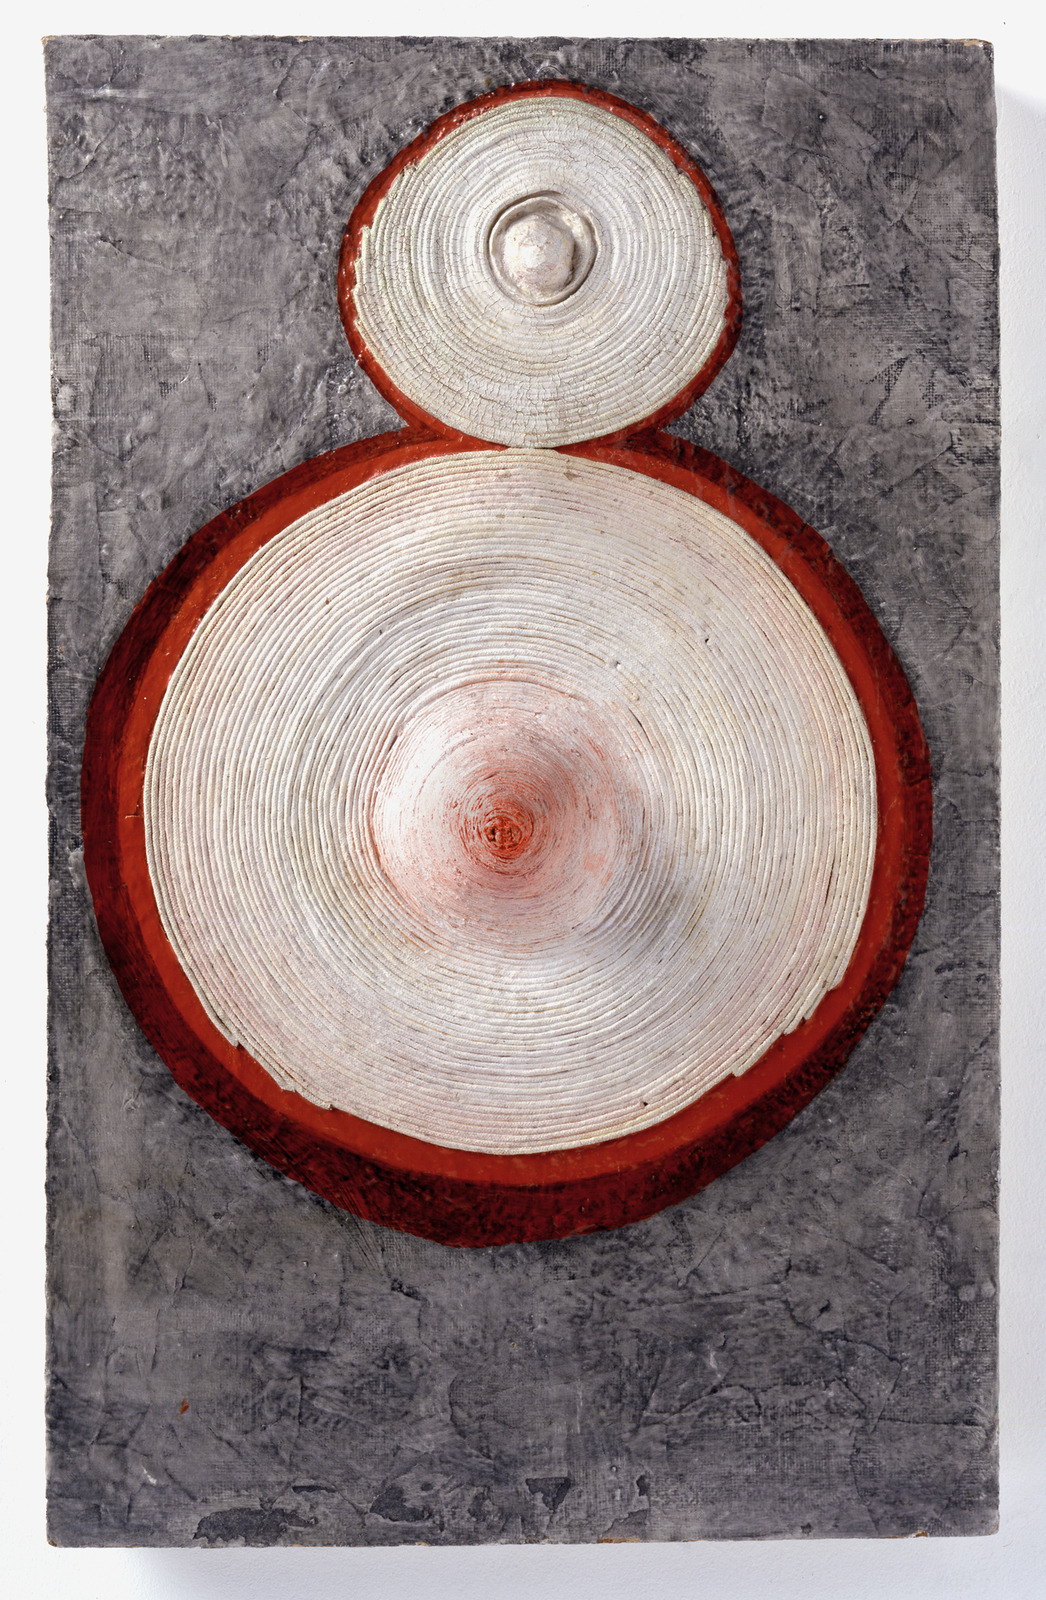 Ringaround Arosie, 1965. Eva Hesse, mixed media on paper-mache.
In a letter written to her close friend Sol LeWitt, Hesse described this work as looking like a “breast and a penis.” She constructed these protruding forms with cloth–covered electrical...